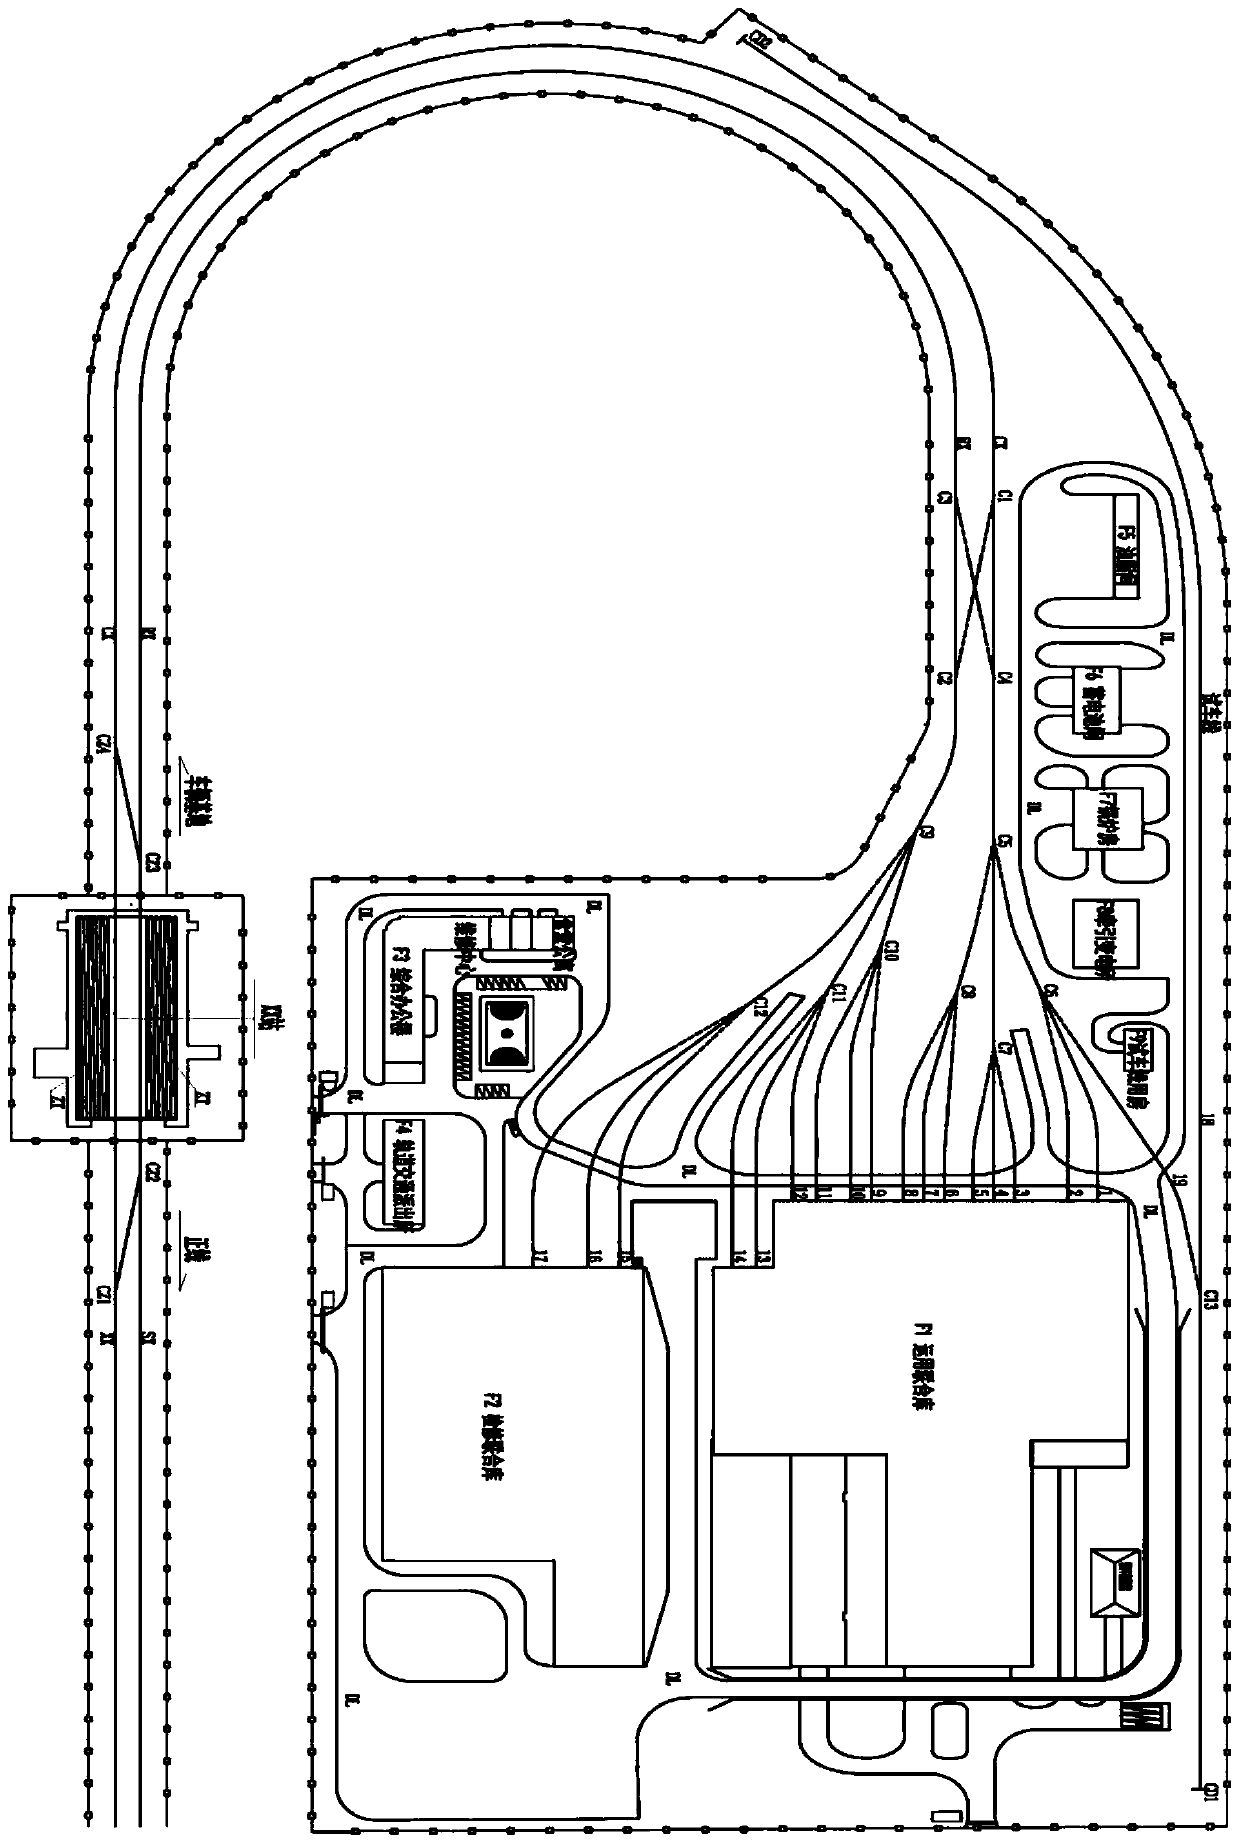 Layout structure of medium-low speed maglev vehicle base and rail connecting station